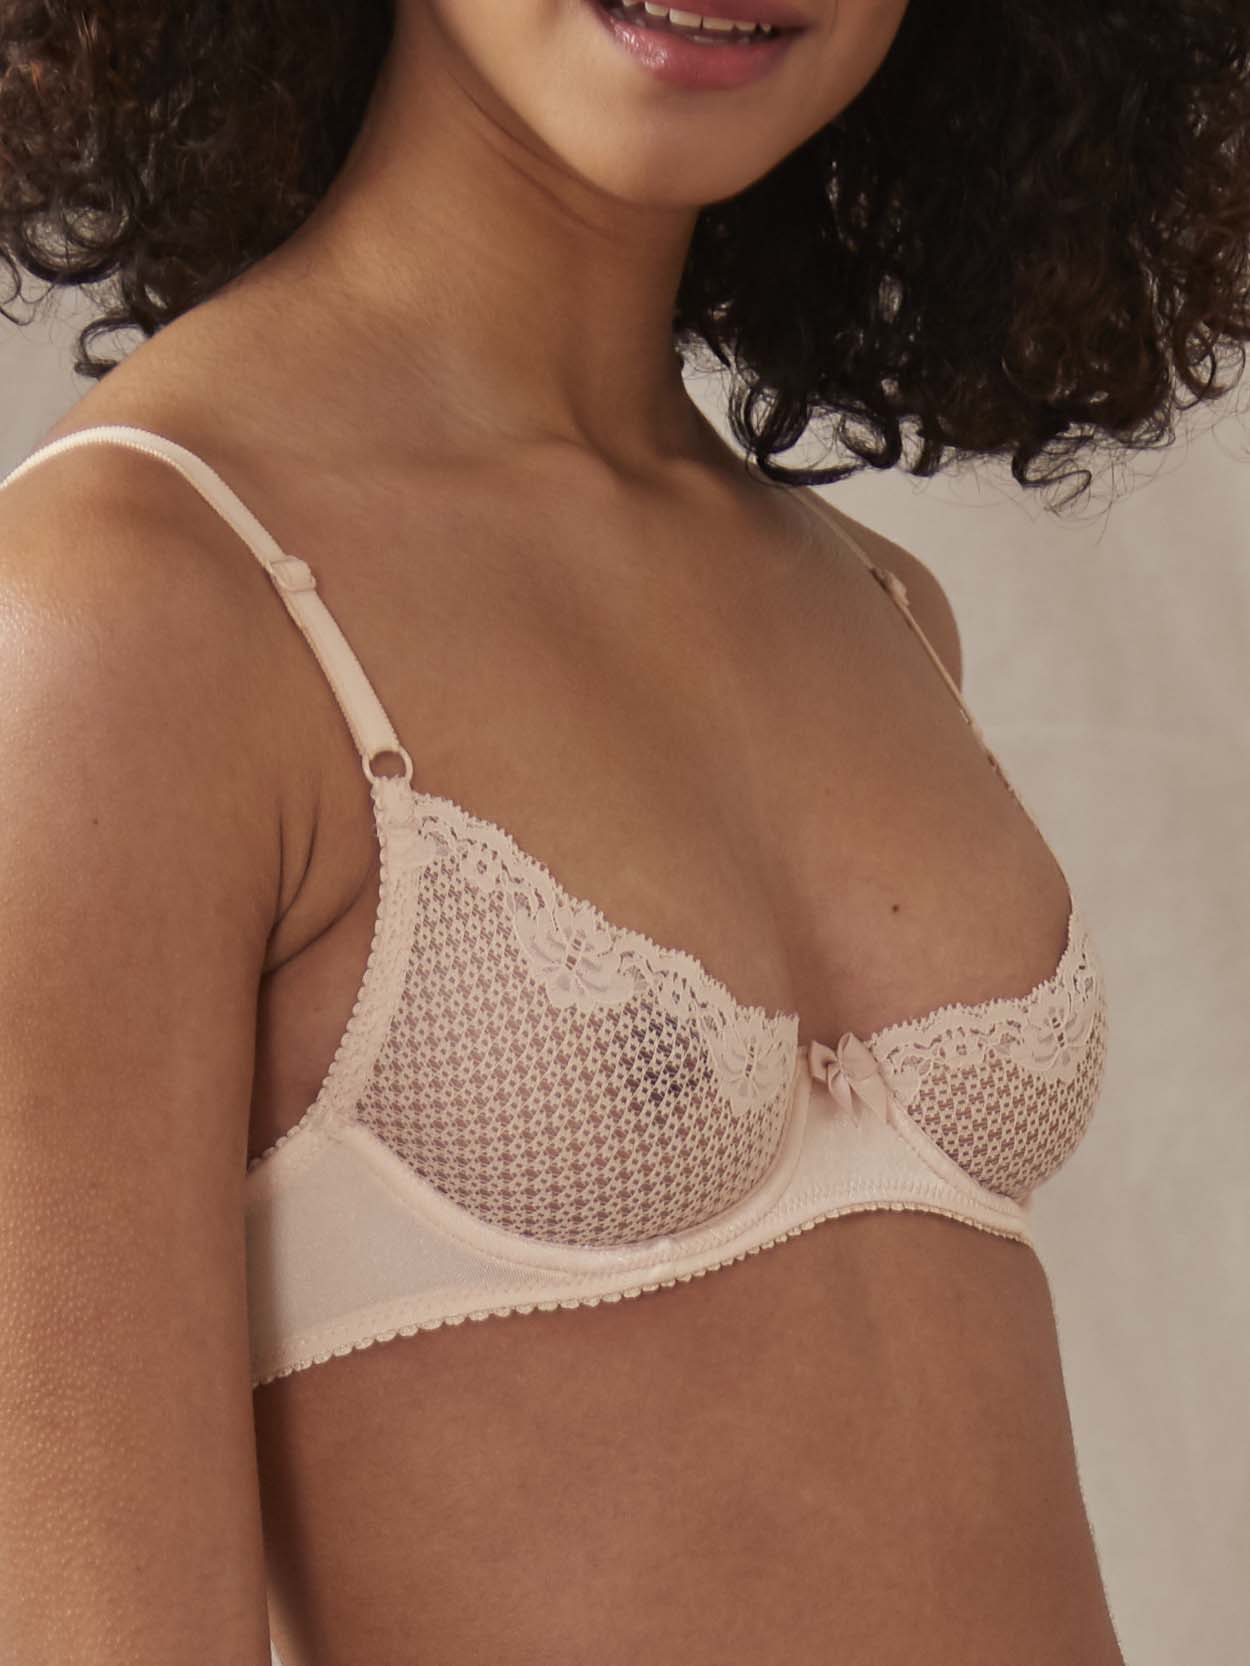 The best bra for small bust